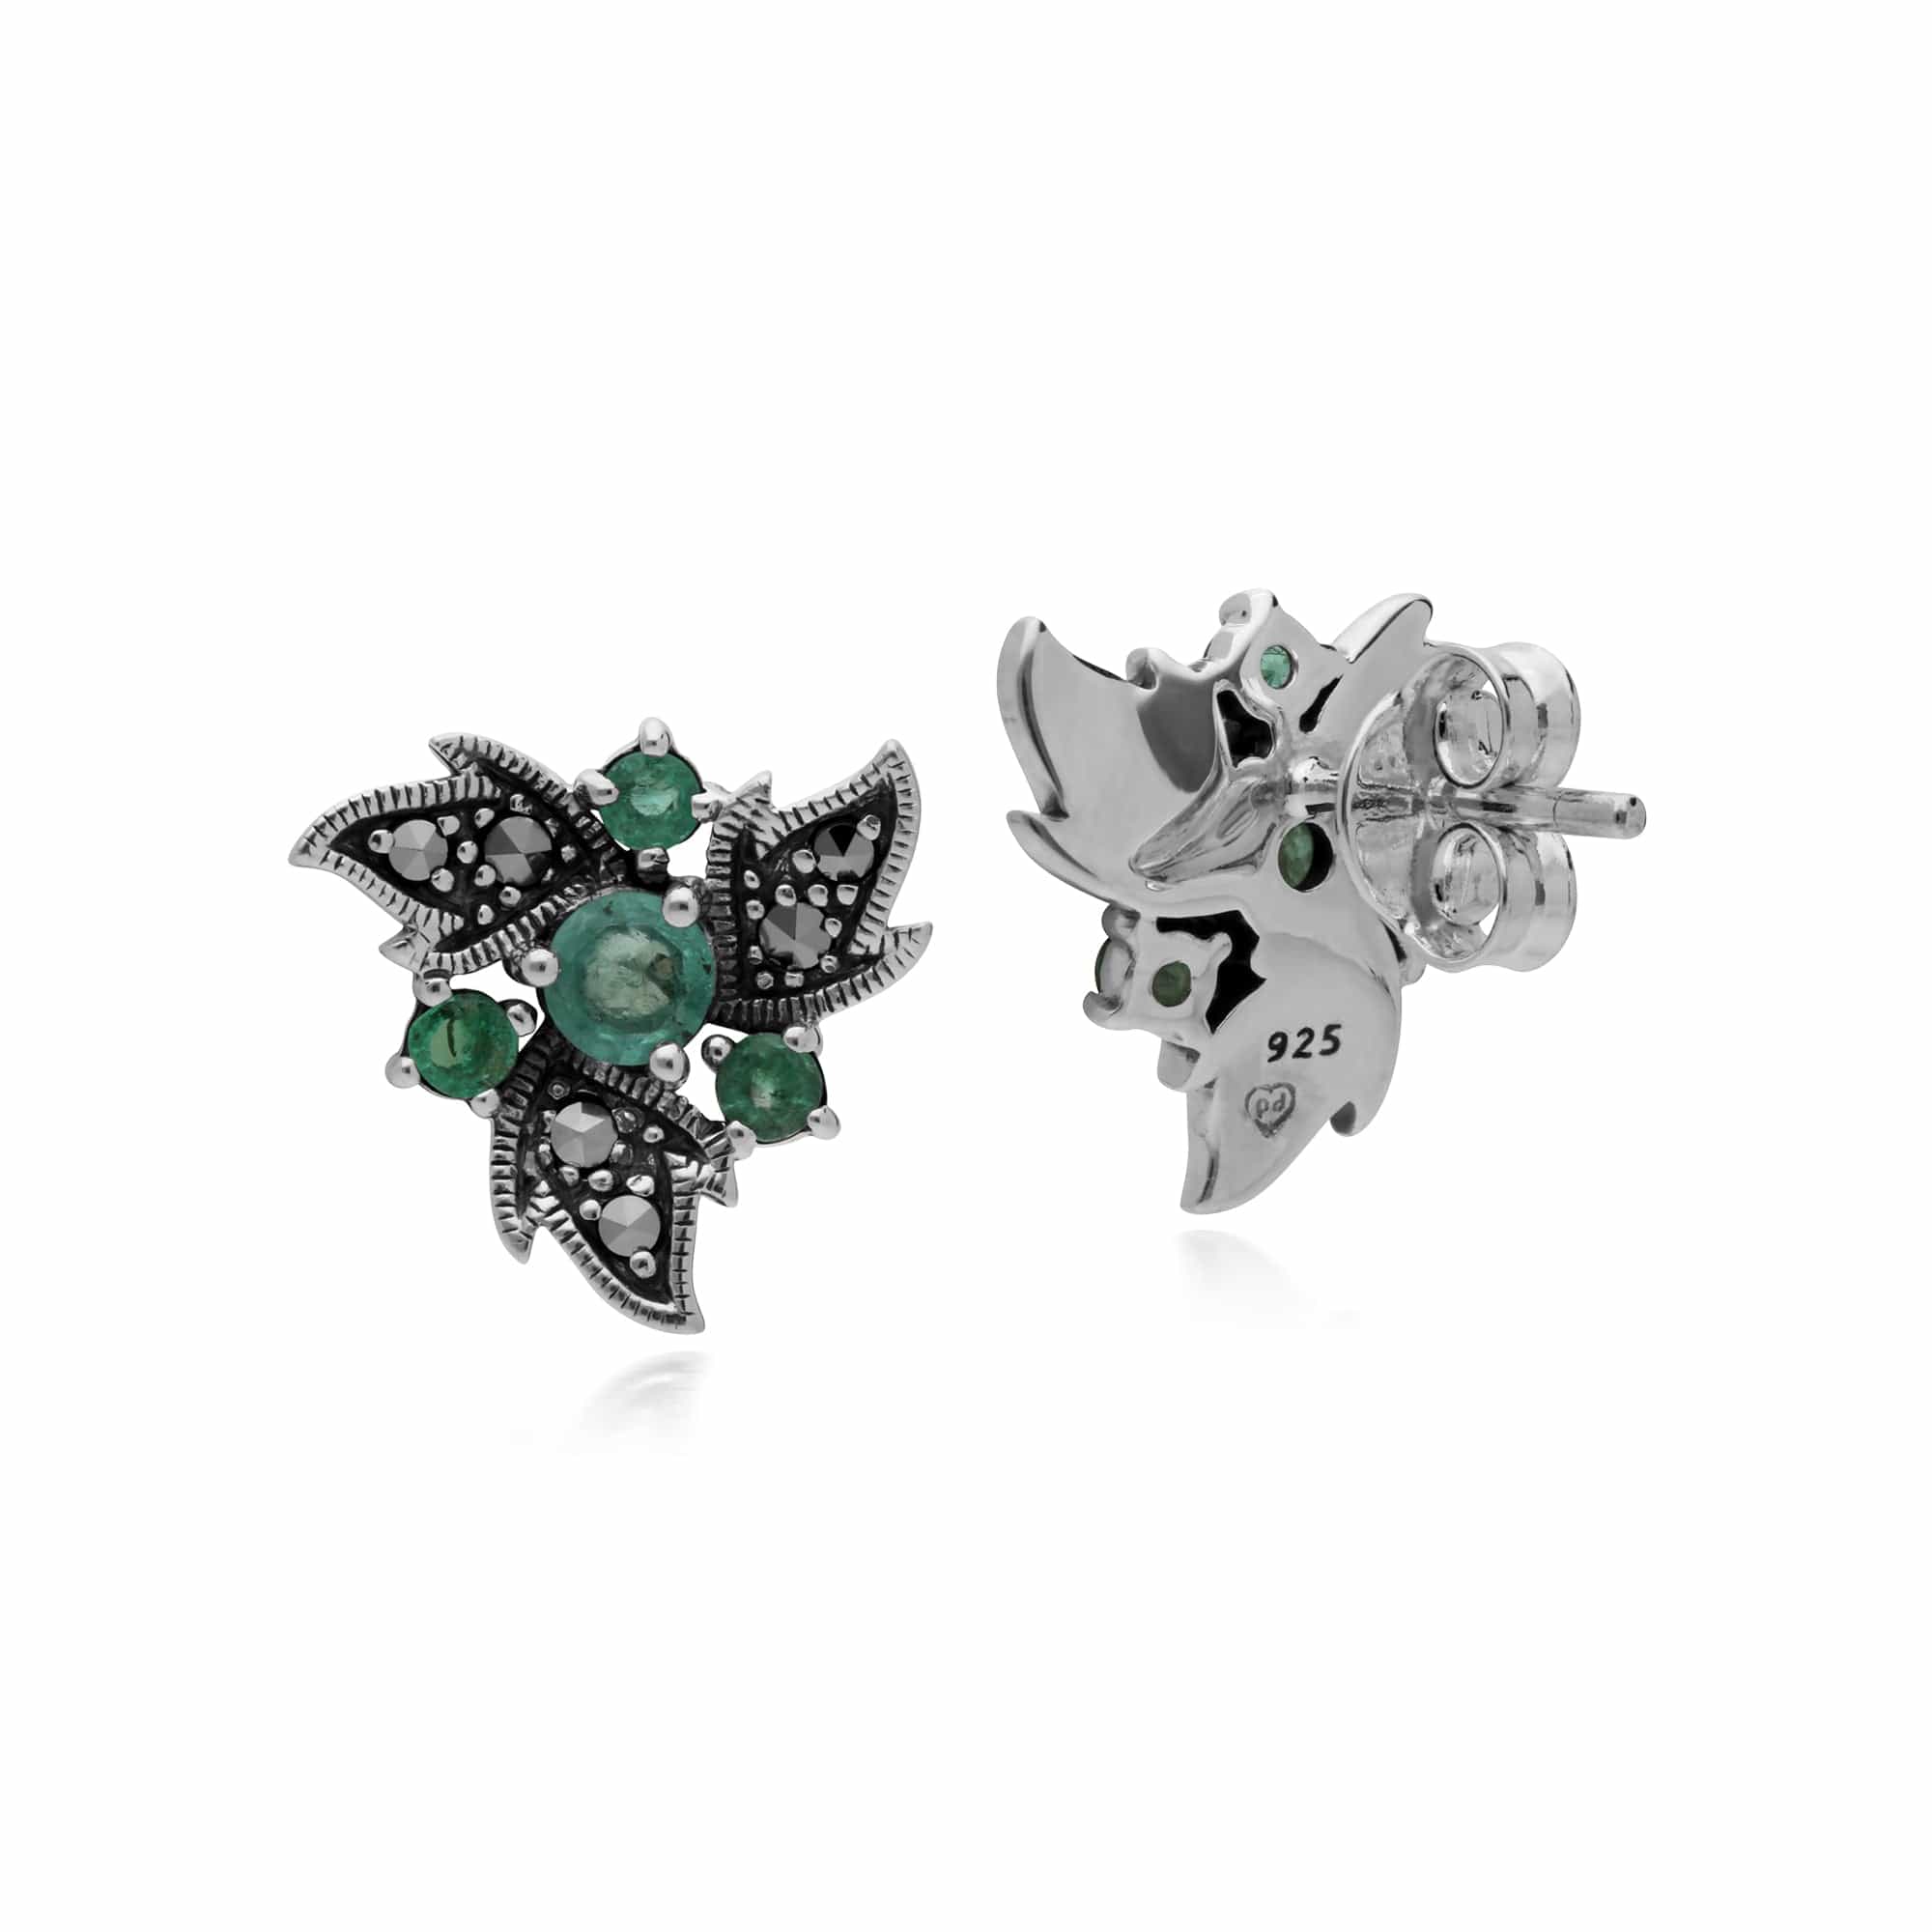 214E860407925 Art Nouveau Style Round Emerald & Marcasite Floral Stud Earrings in Sterling Silver 2